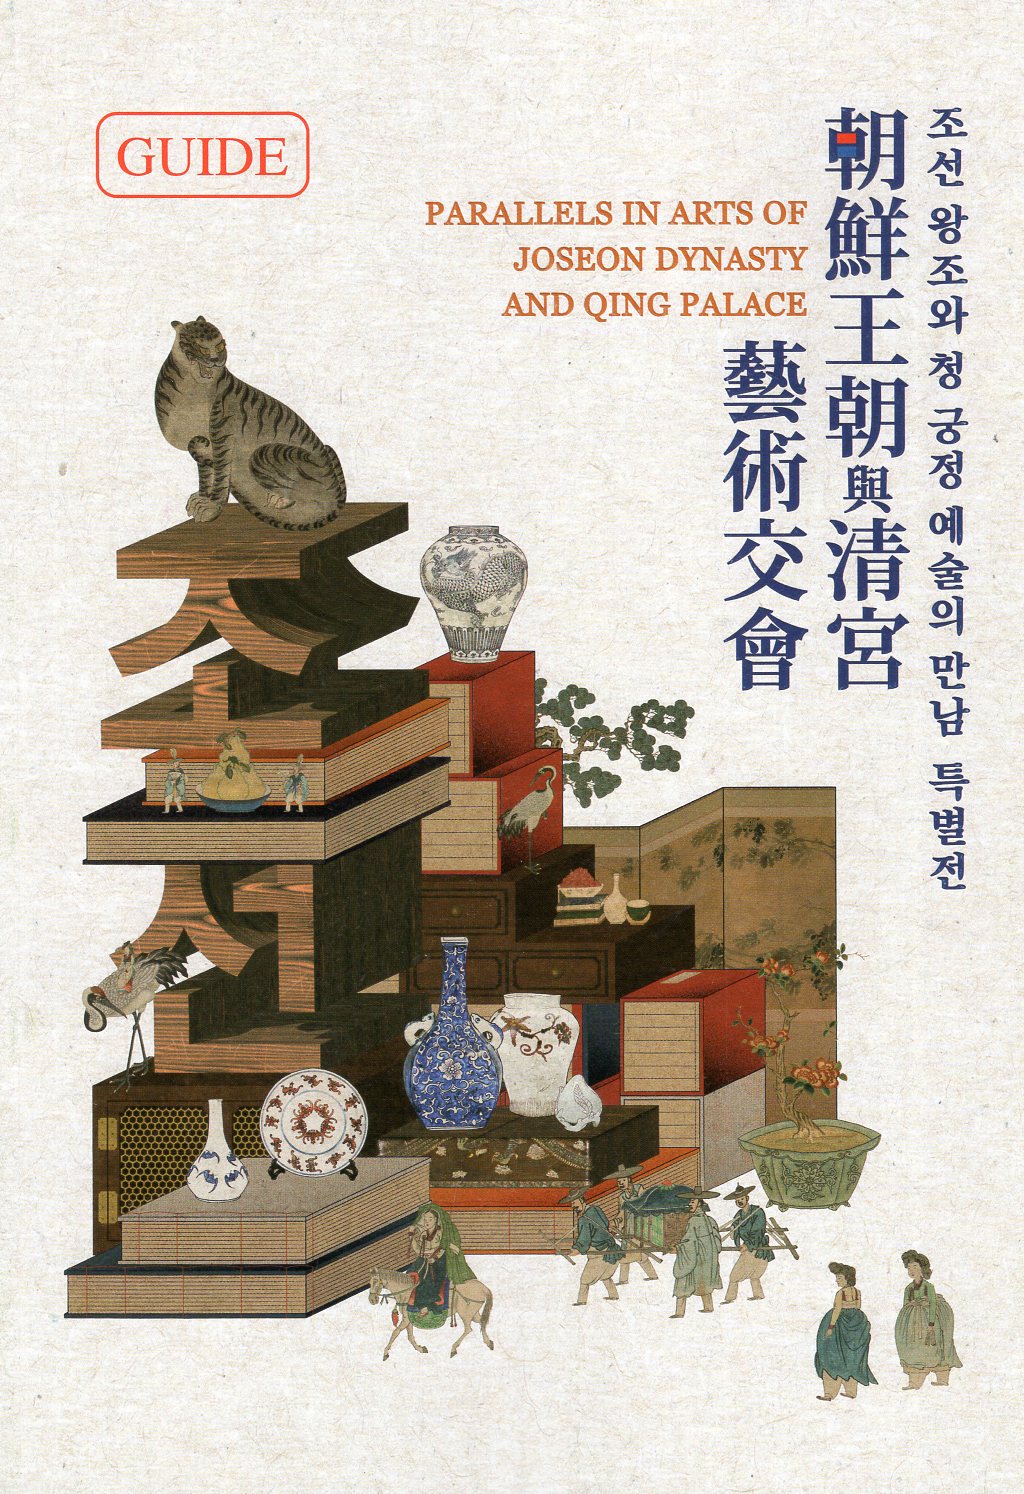 Parallels in arts of Joseon dynasty and Qing palace